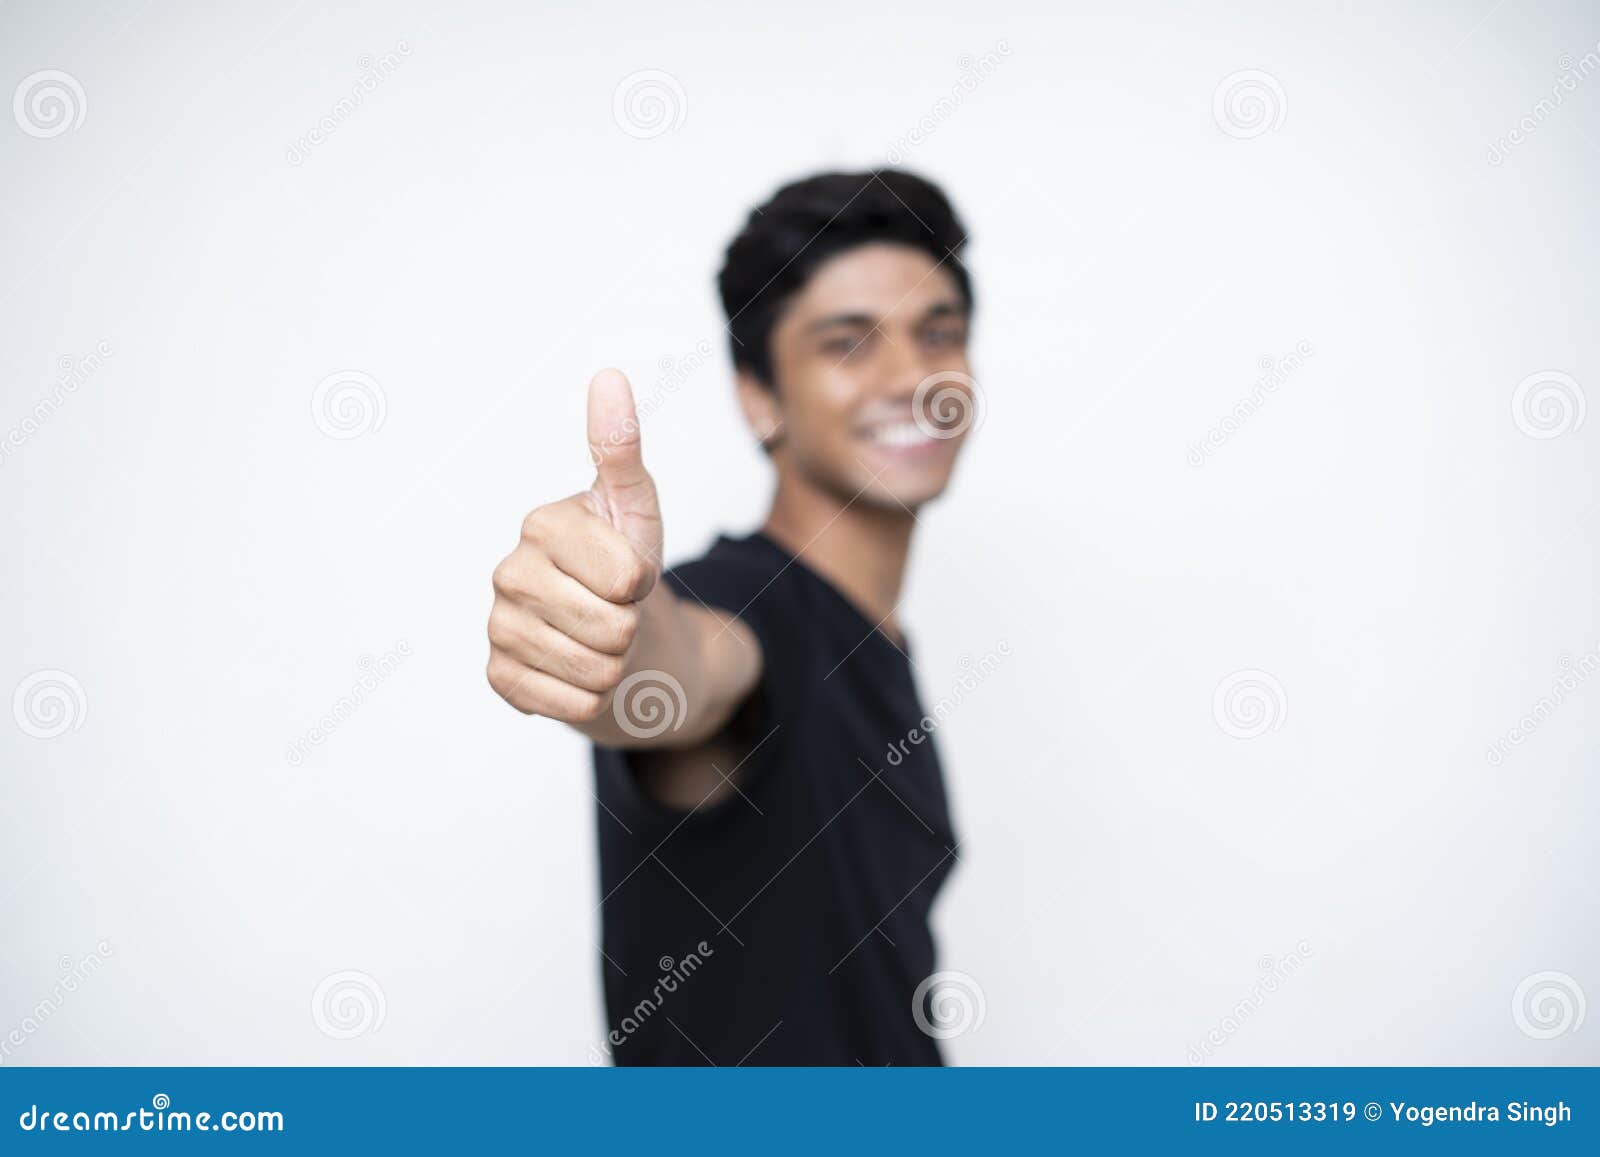 Young Indian Boy Showing Thumbs Up To the Camera Standing on a White ...